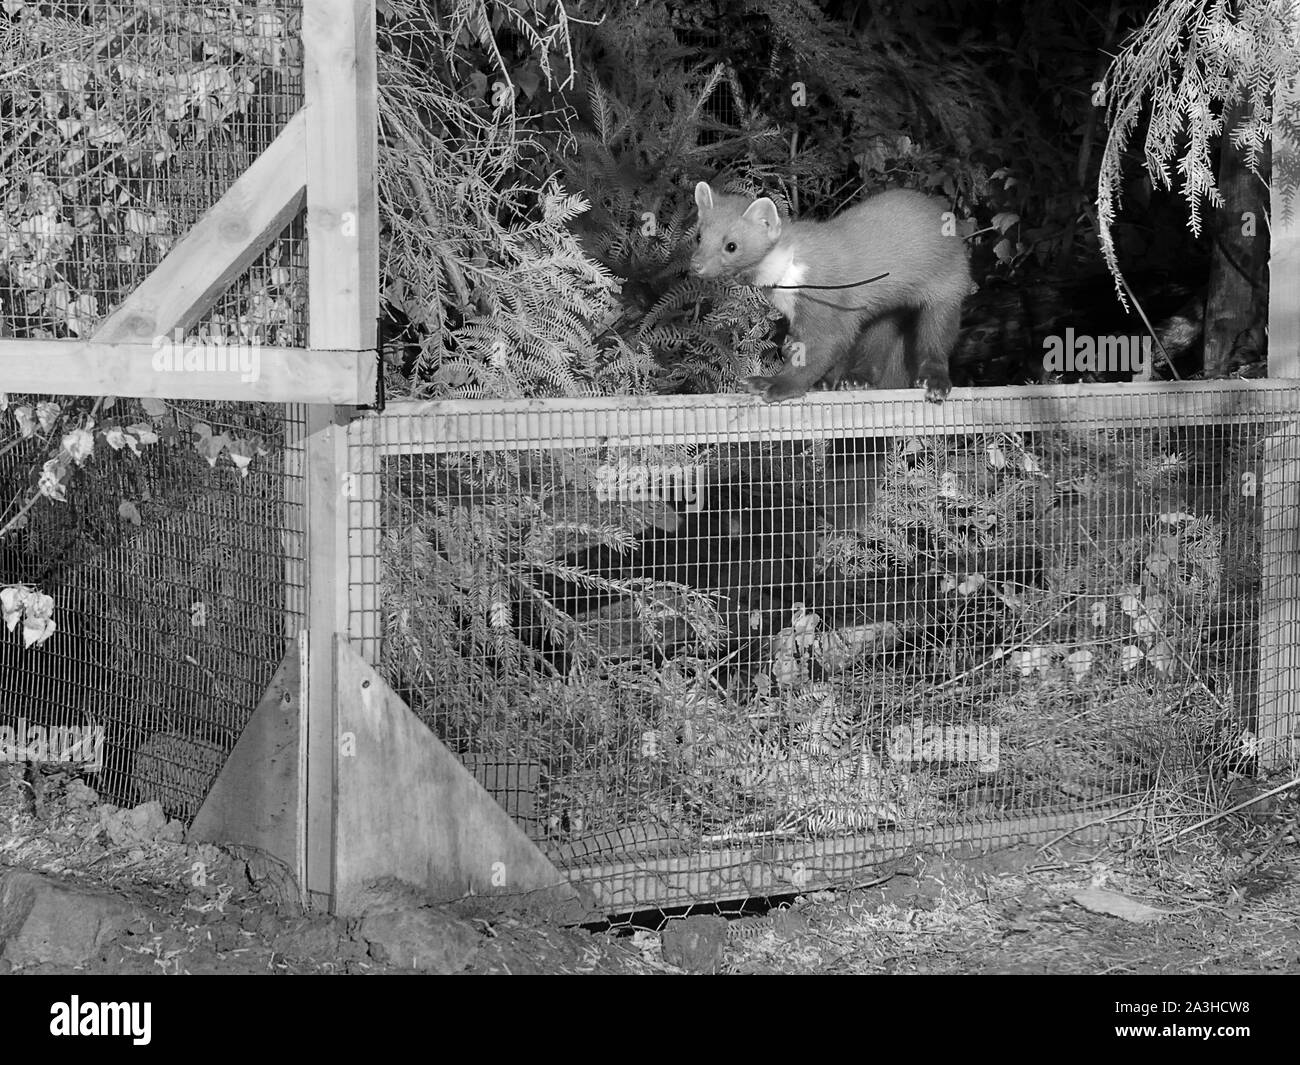 Radio-collared Pine Marten (Martes martes) emerging from a soft release cage at night during a reintroduction to the Forest of Dean, Glos, UK Sept '19 Stock Photo